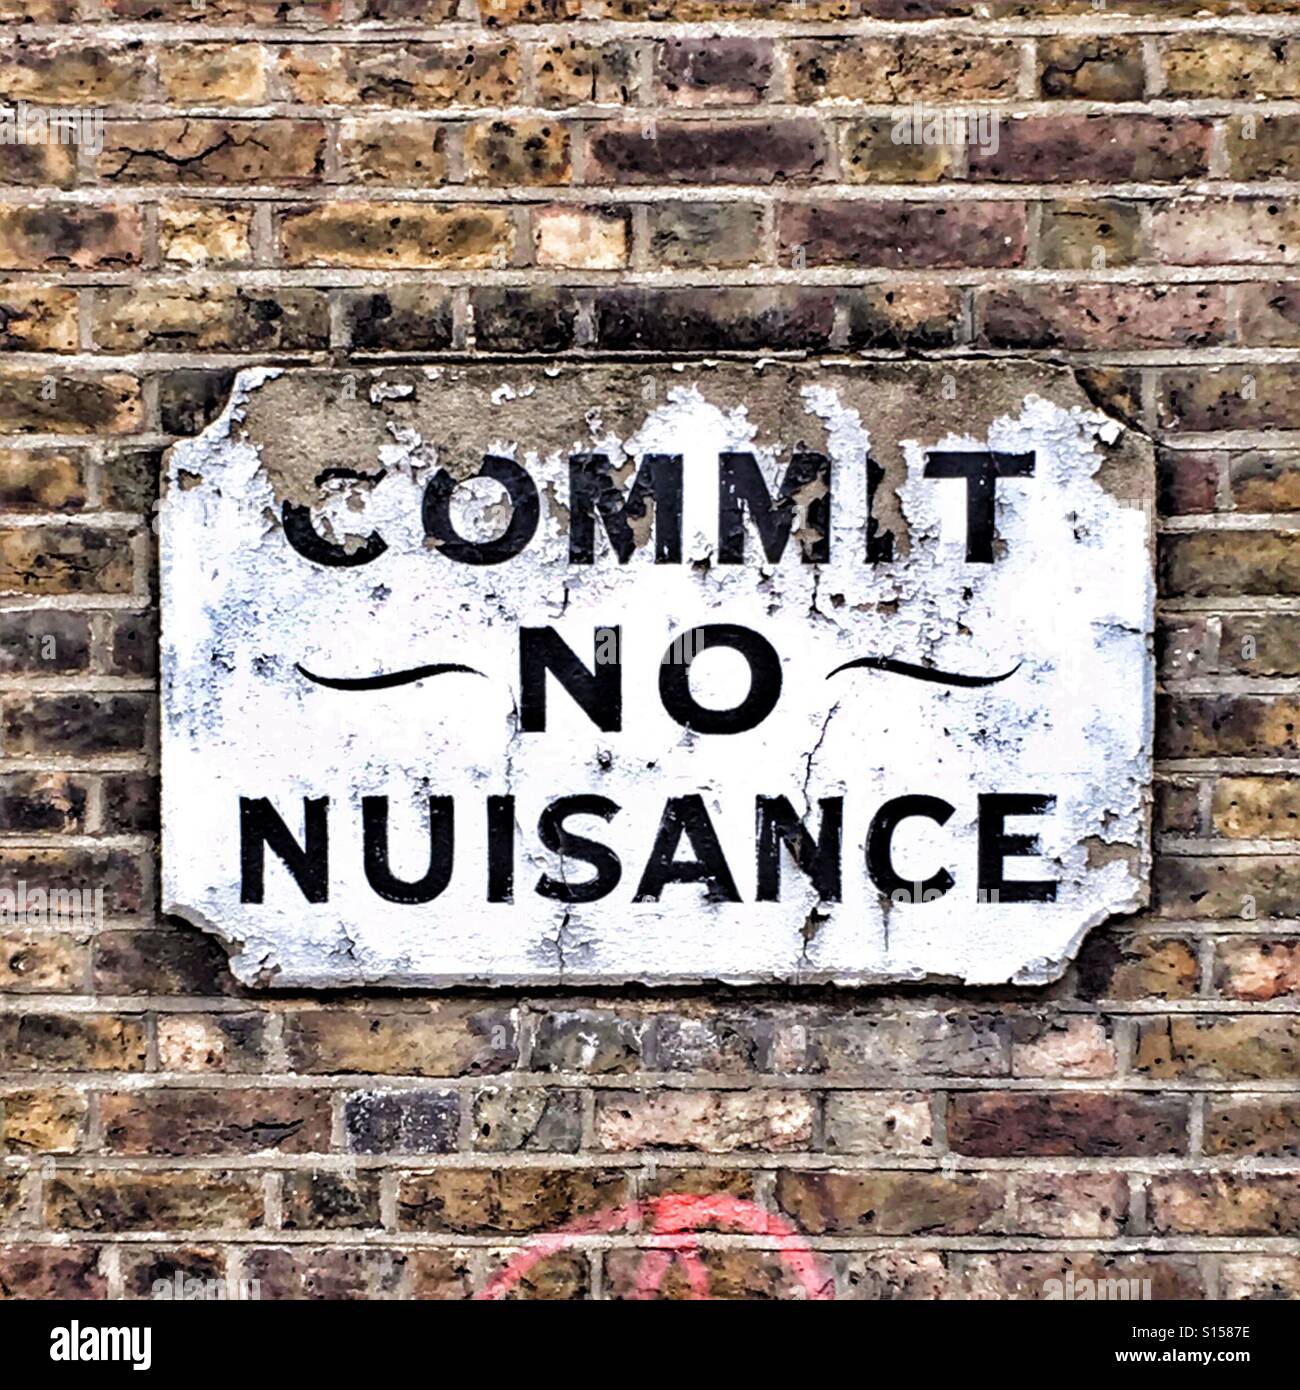 Commit no nuisance sign on brick wall Stock Photo